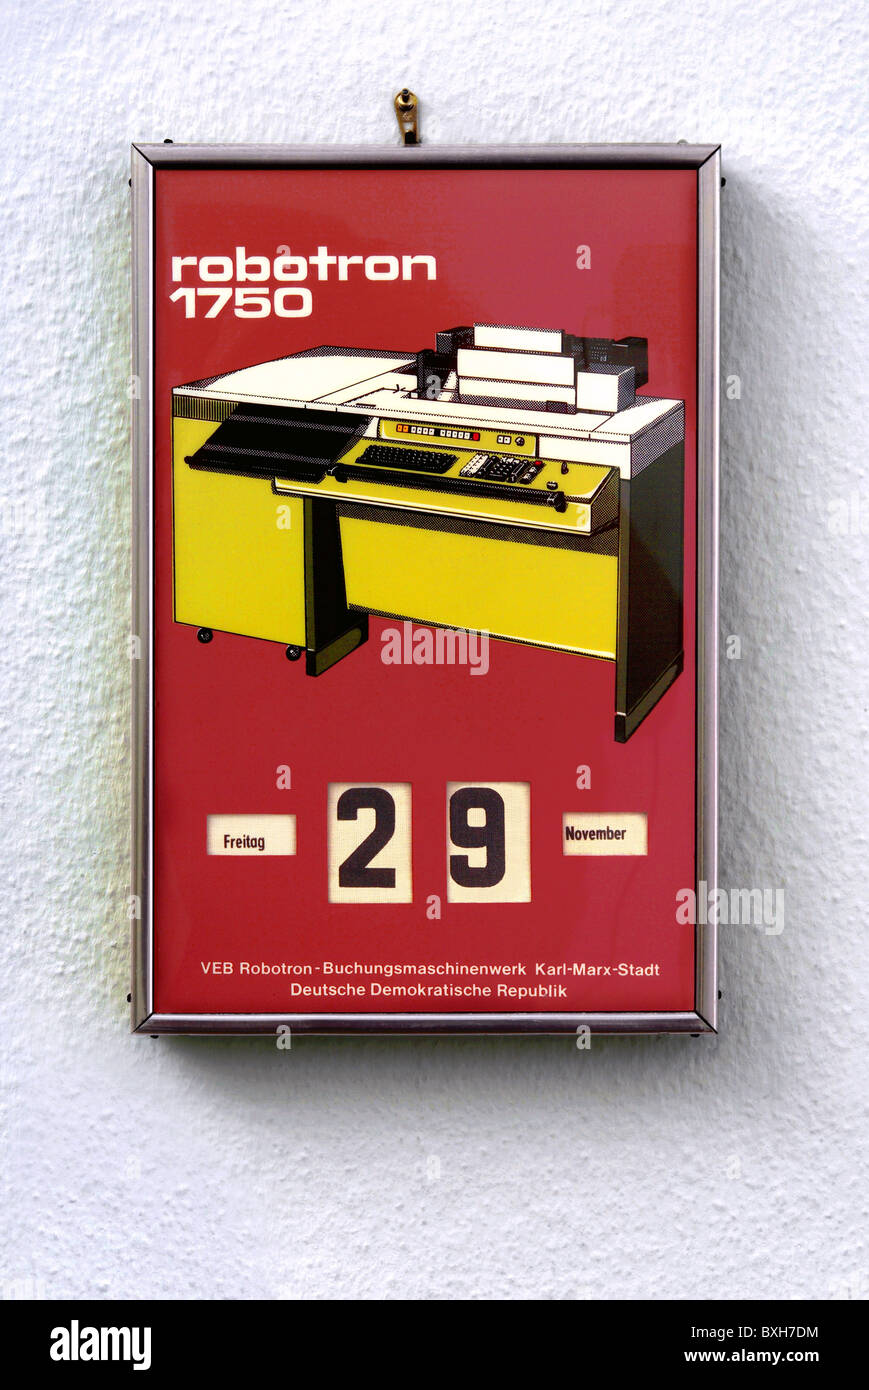 calendar, perpetual calendar, VEB Robotron, GDR, circa 1978, 1970s, 70s, 20th century, historic, historical, date, accounting machine type Robotron 1750, 2 kilobyte ROM, 8 KByte ferrite core memory, computing, technics, data processing, data handling, data processings, automatic data processing, electronic data processing /EDP/, decentralized data processing, business data processing, integrated printer, GDR, DDR, East-Germany, East Germany, wall decoration, product, Additional-Rights-Clearences-Not Available Stock Photo